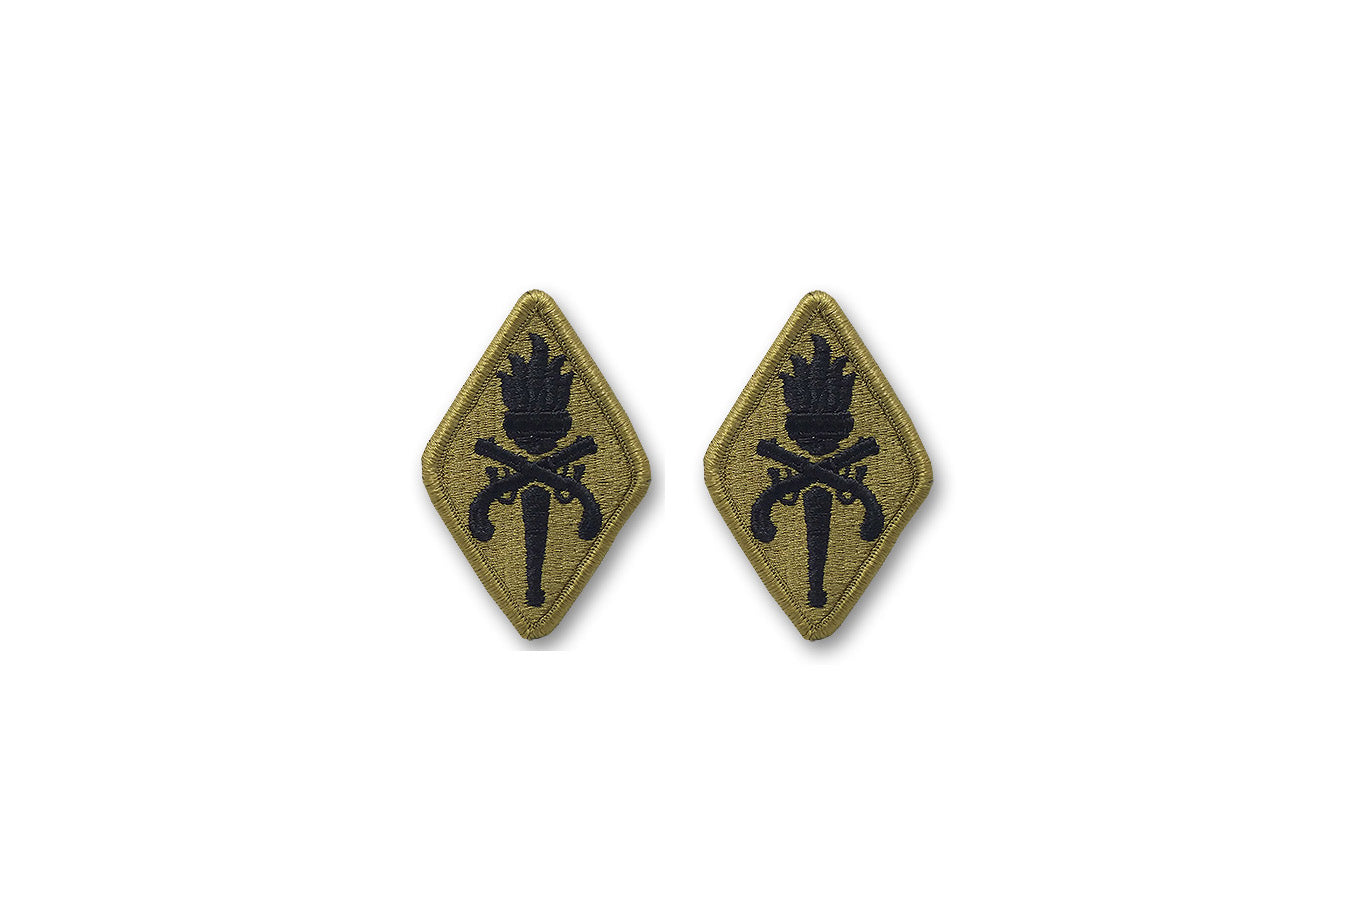 U.S. Army Military Police School OCP Patch with Hook Fastener (pair)